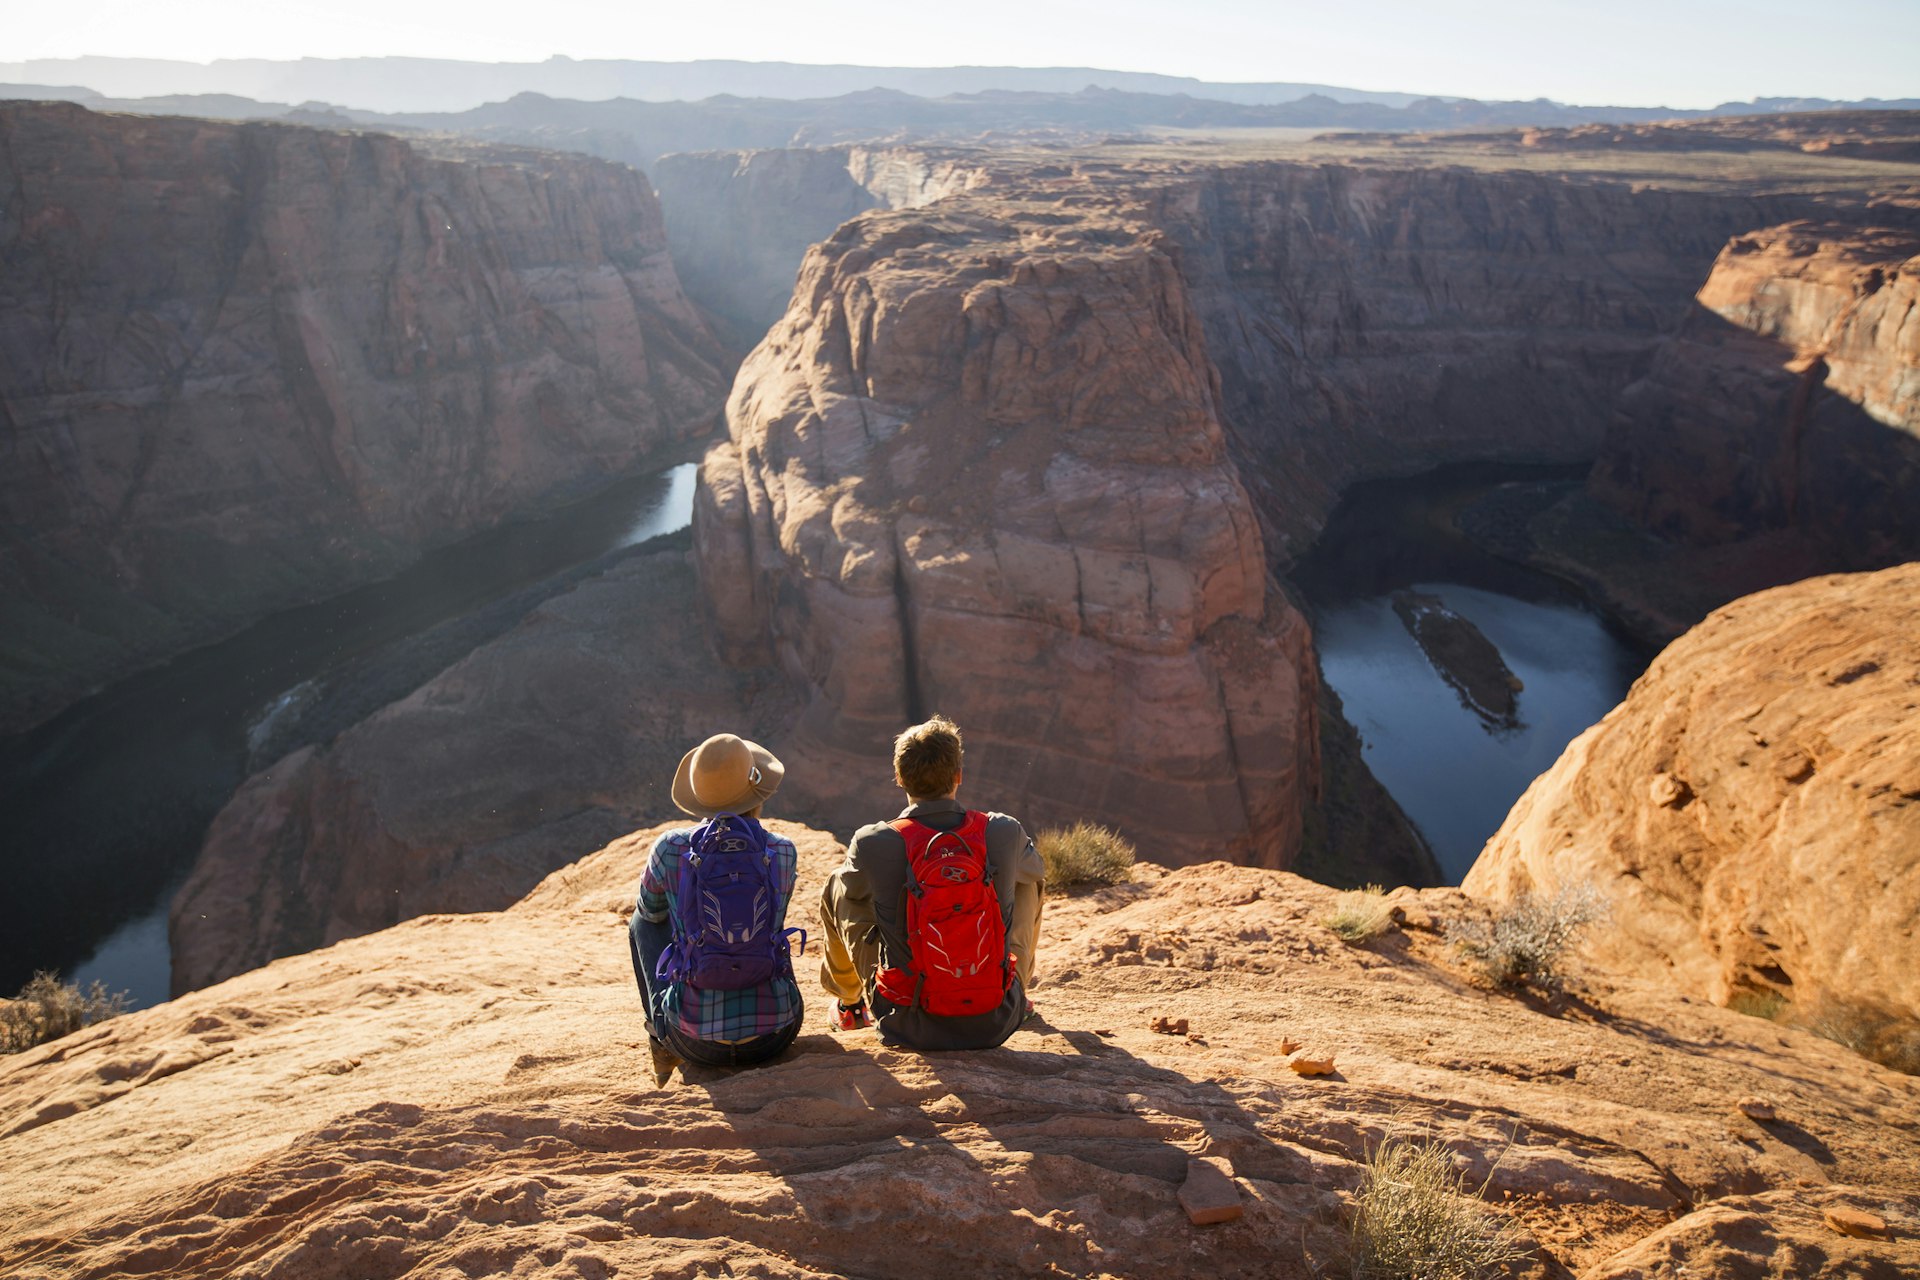 Two people sit on the cliff above a vast curve in a river surrounded by red rock formations